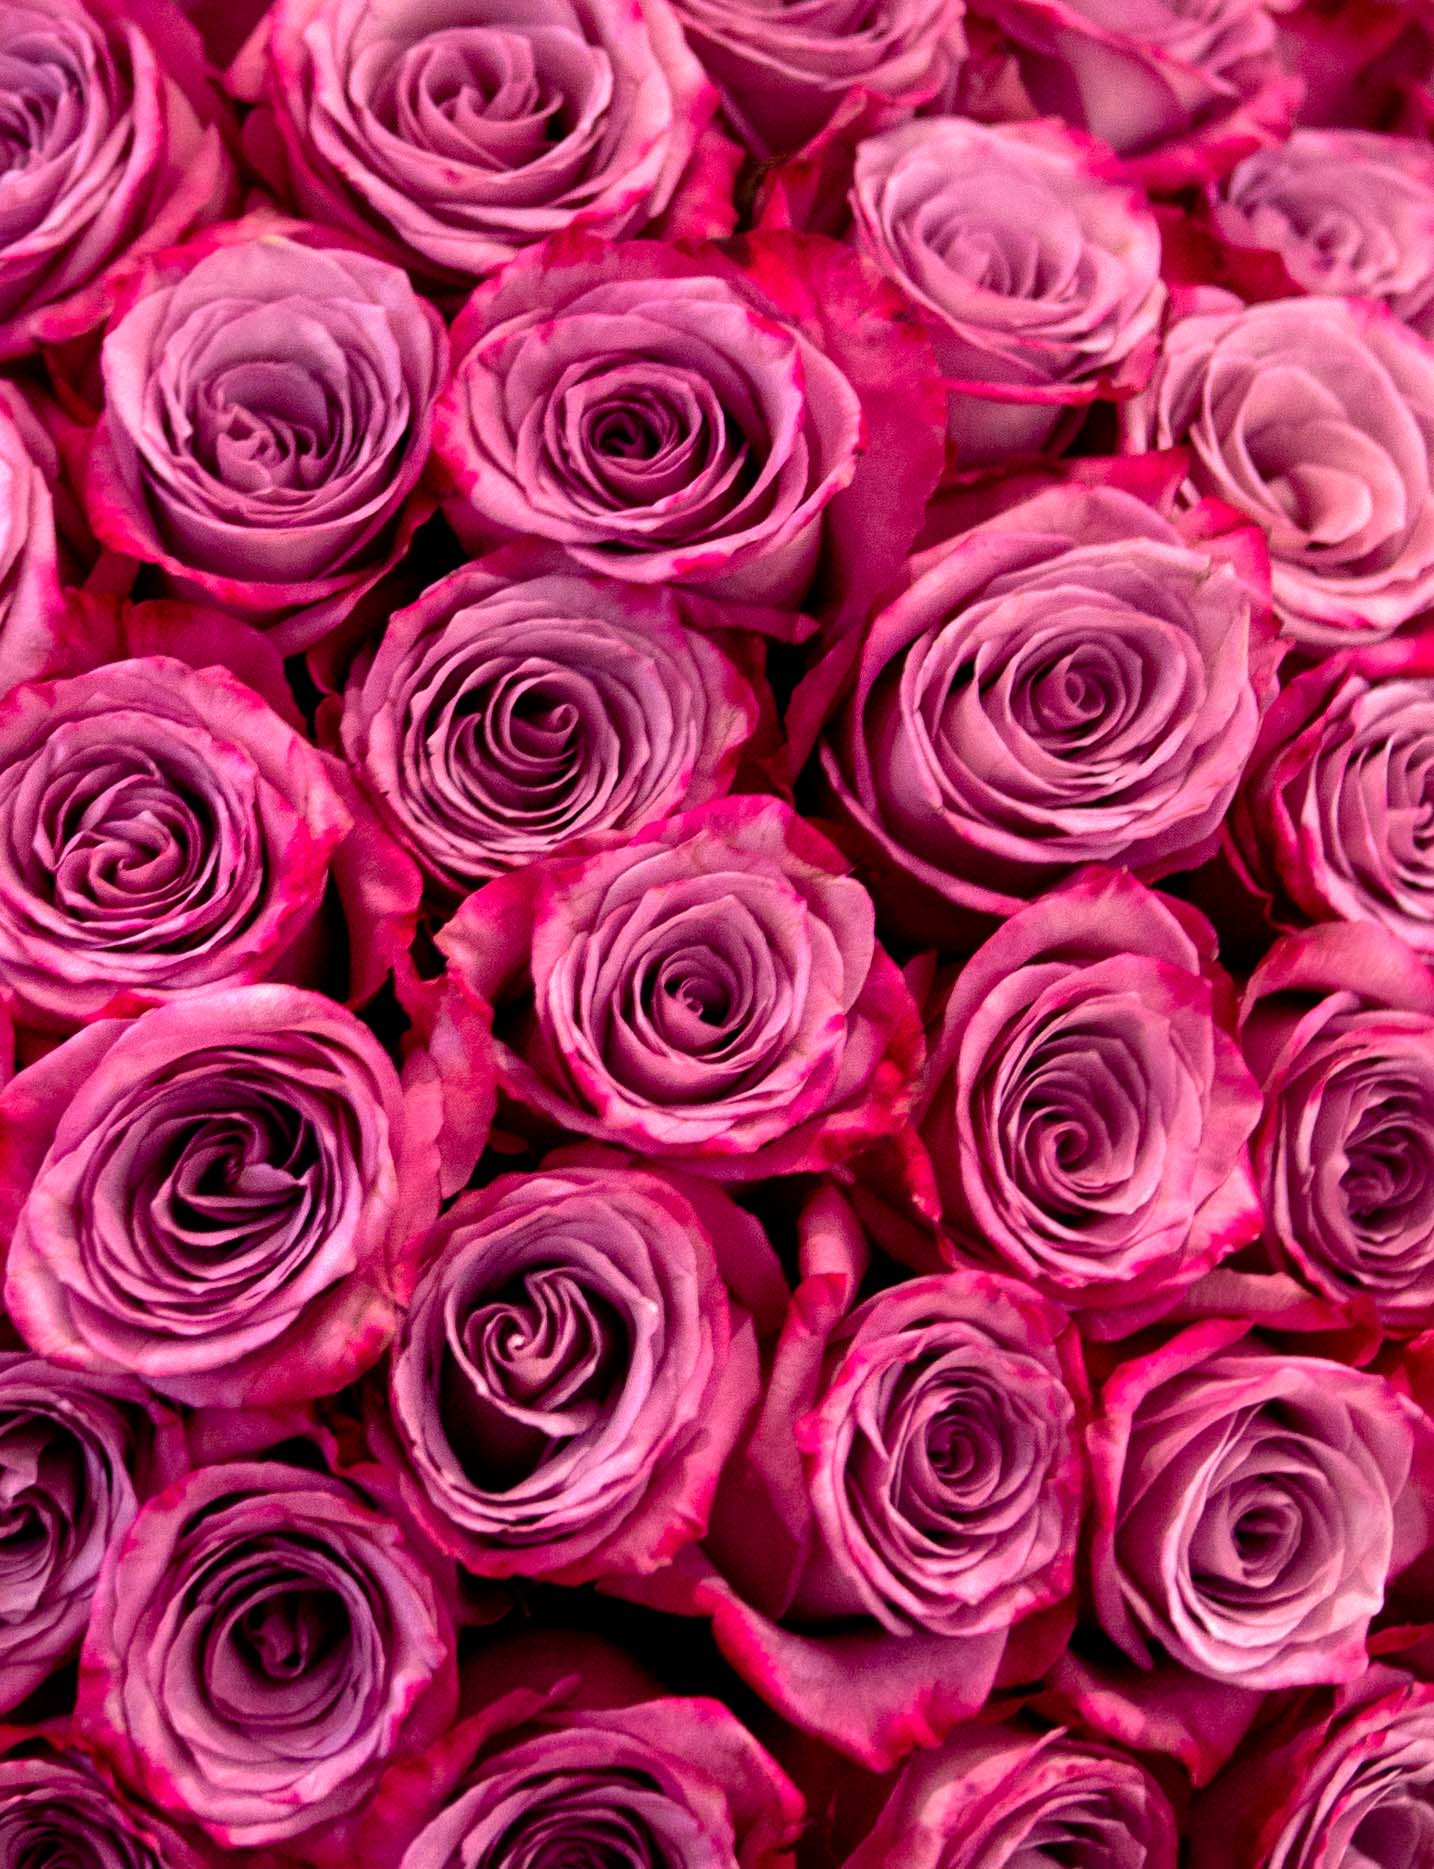 Beautiful Bouquet of Pink Roses, Lavender Moody Blues - 100 Beautiful Premium Roses Bouquet